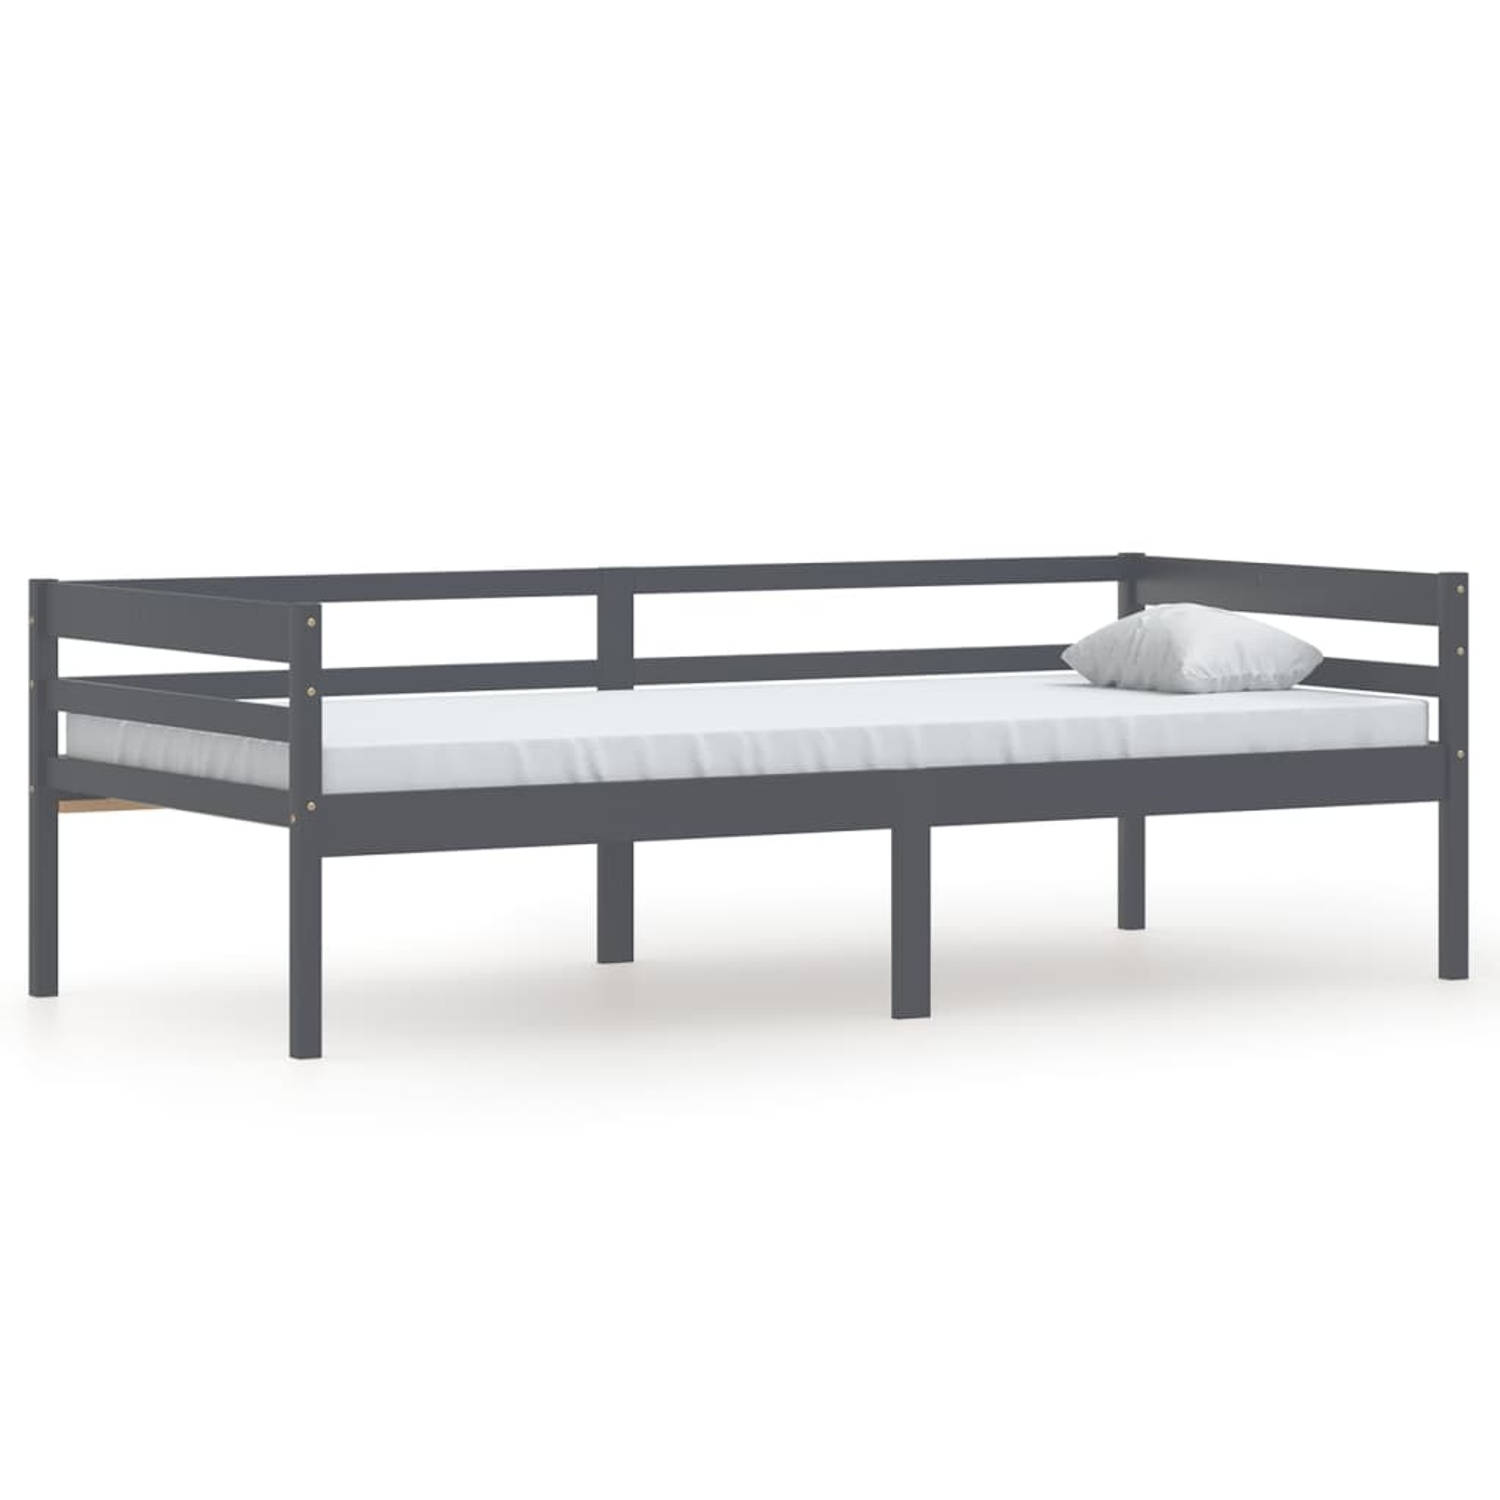 The Living Store Bedframe massief grenenhout donkergrijs 90x200 cm - Bedframe - Bedframe - Bed Frame - Bed Frames - Bed - Bedden - 1-persoonsbed - 1-persoonsbedden - Eenpersoons Be